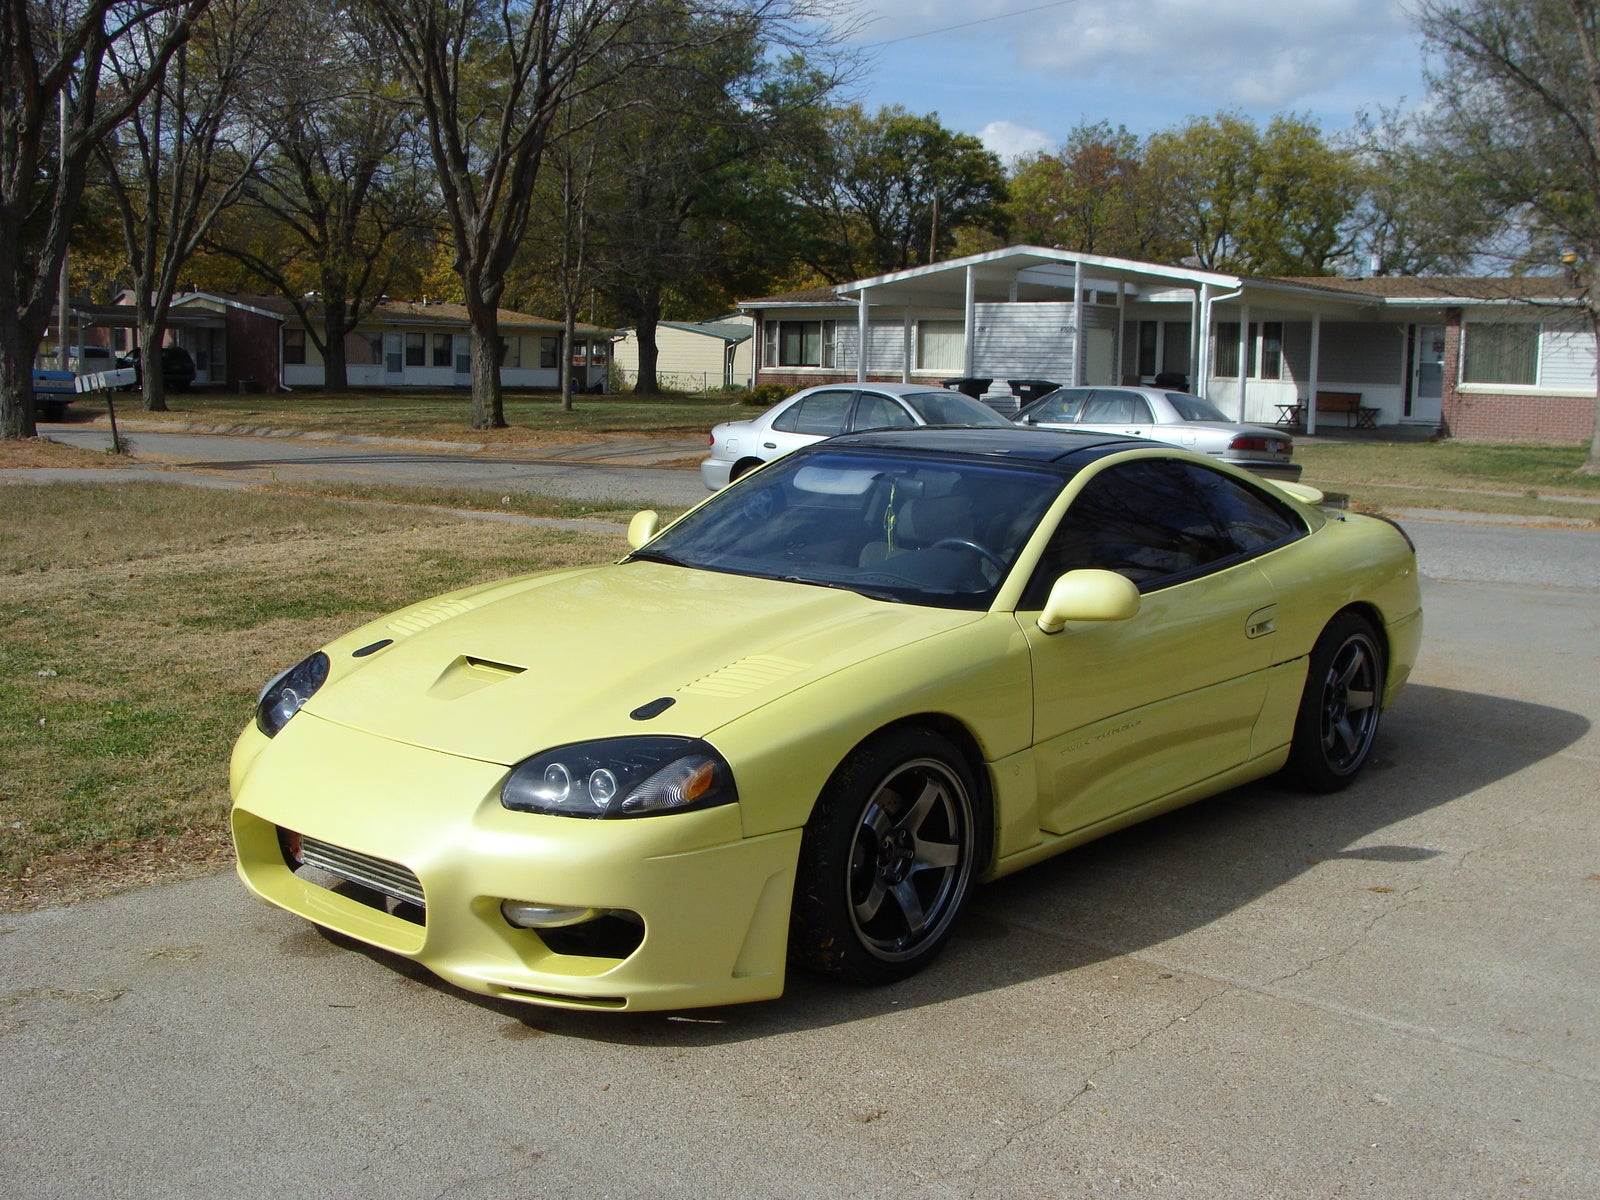 1994 Dodge Stealth 2 Dr R/T Turbo AWD Hatchback, 94 Stealth Twin turbo ...